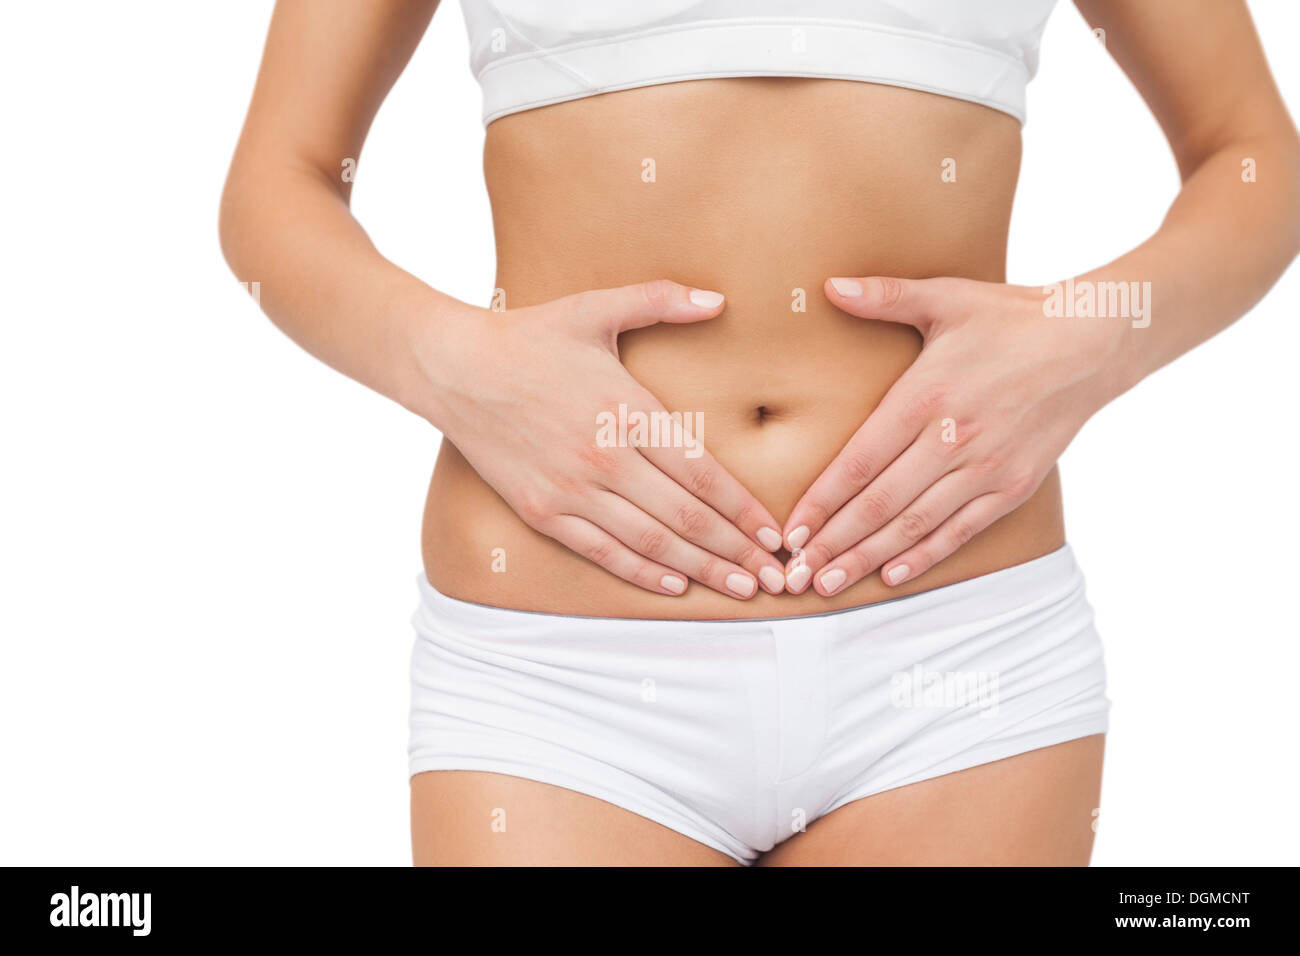 Mid section of slim woman touching her belly with her hands Stock Photo